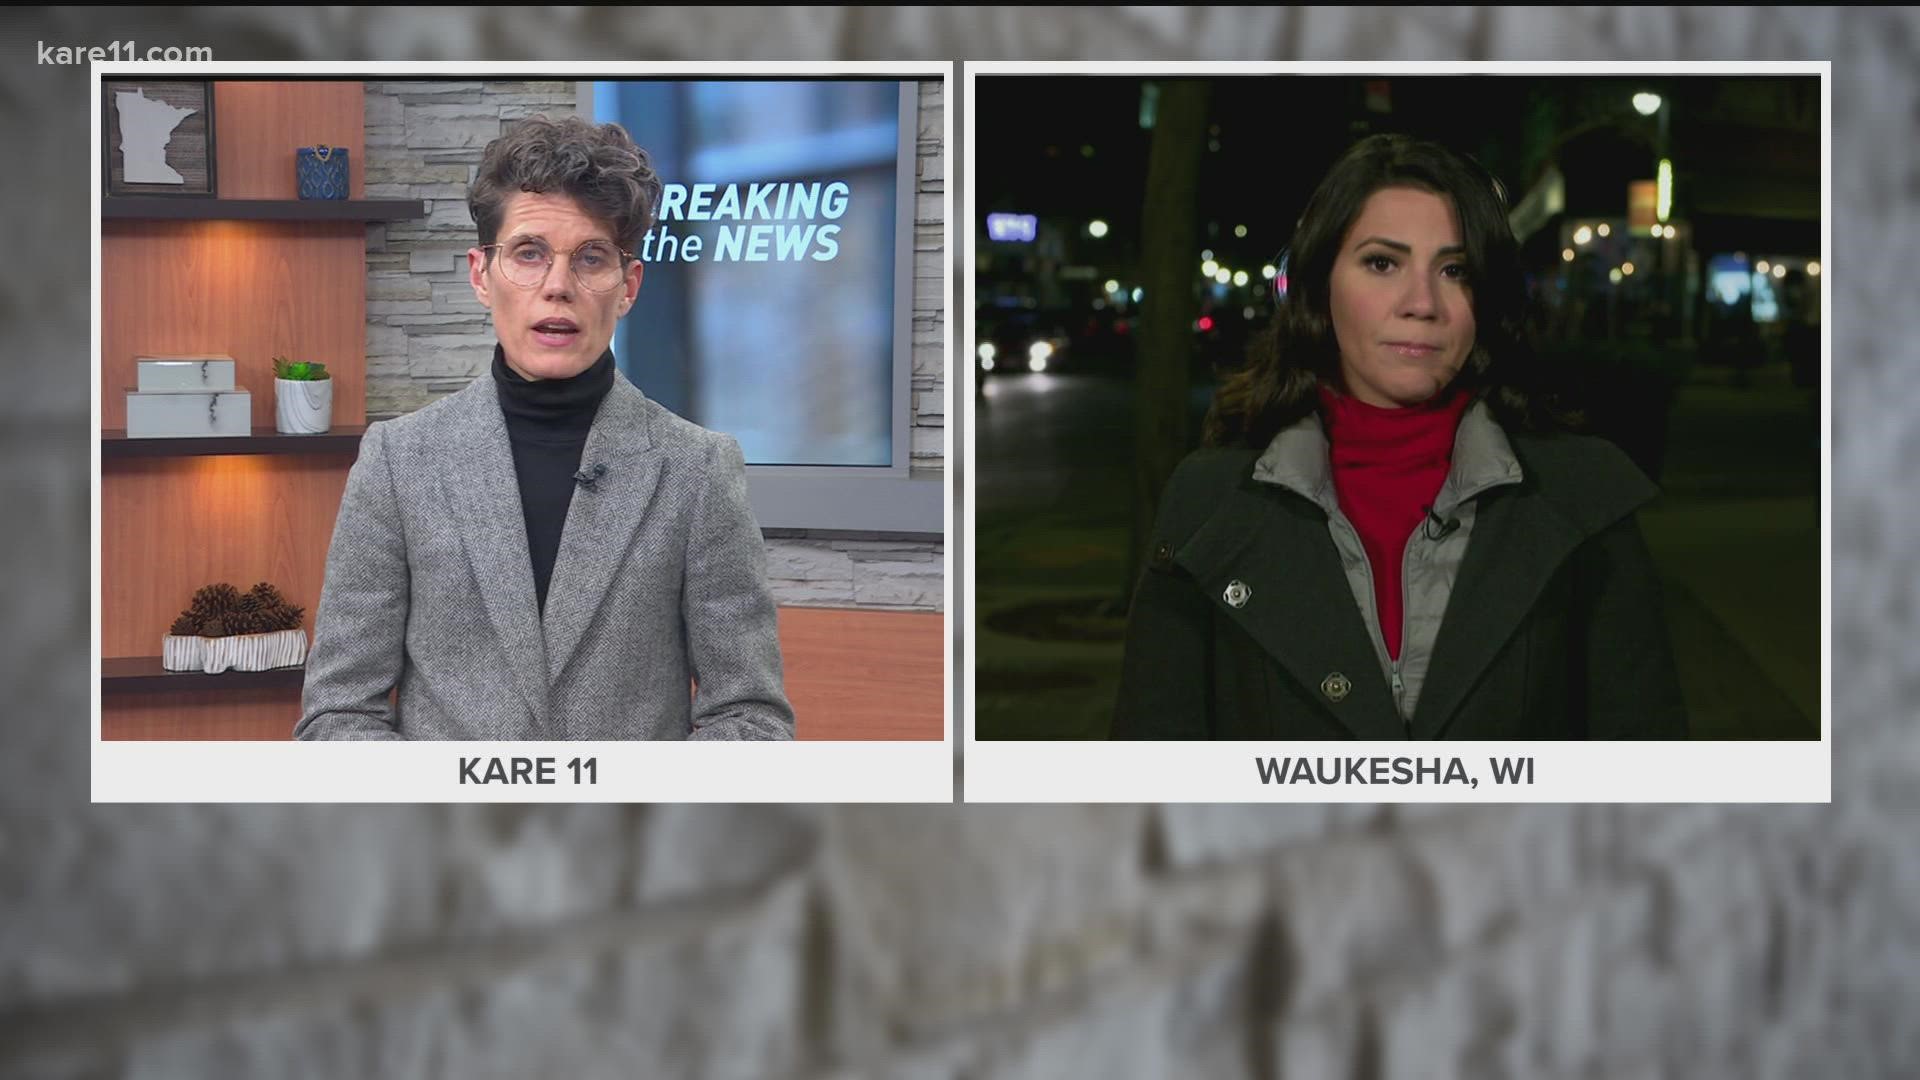 CNN's Julia Vargas Jones joins Jana Shortal from Waukesha, Wisconsin with what we know so far about Sunday night's tragic parade event.